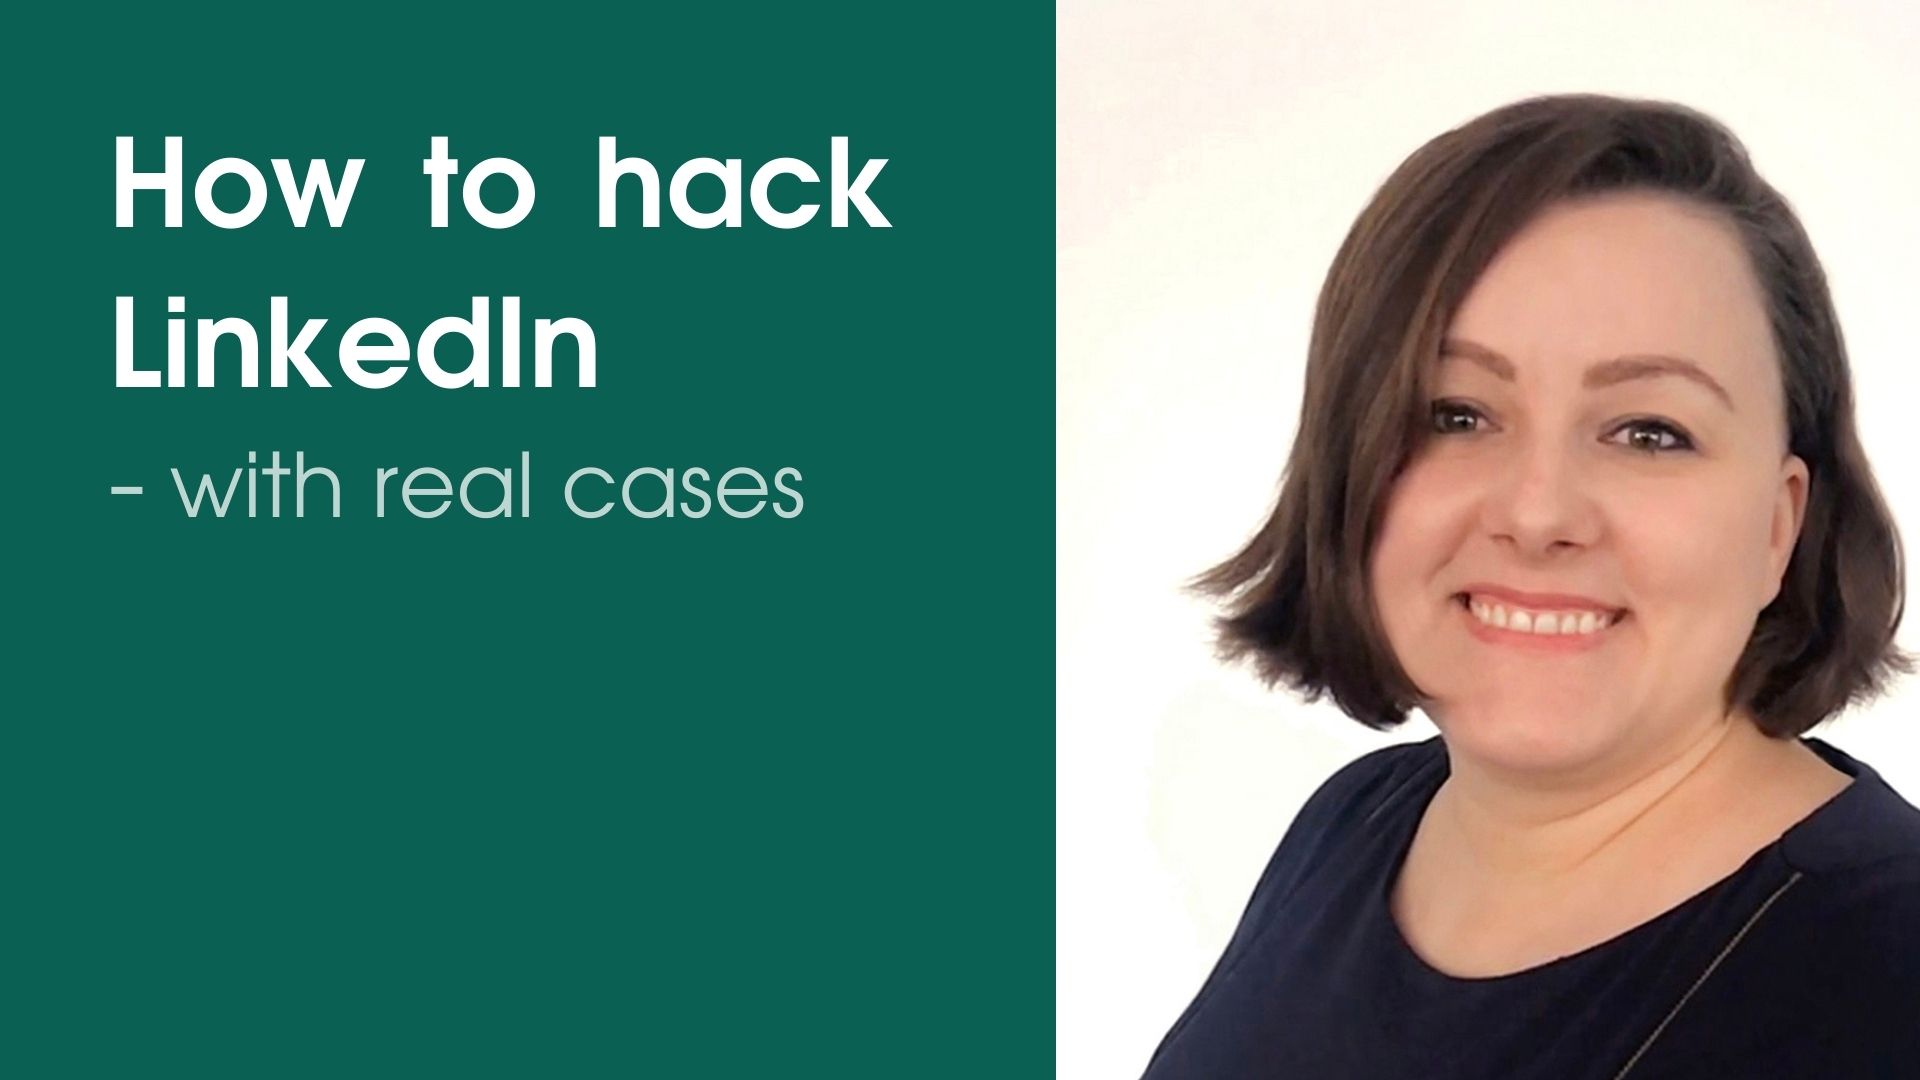 How to hack LinkedIn - with real cases (video)